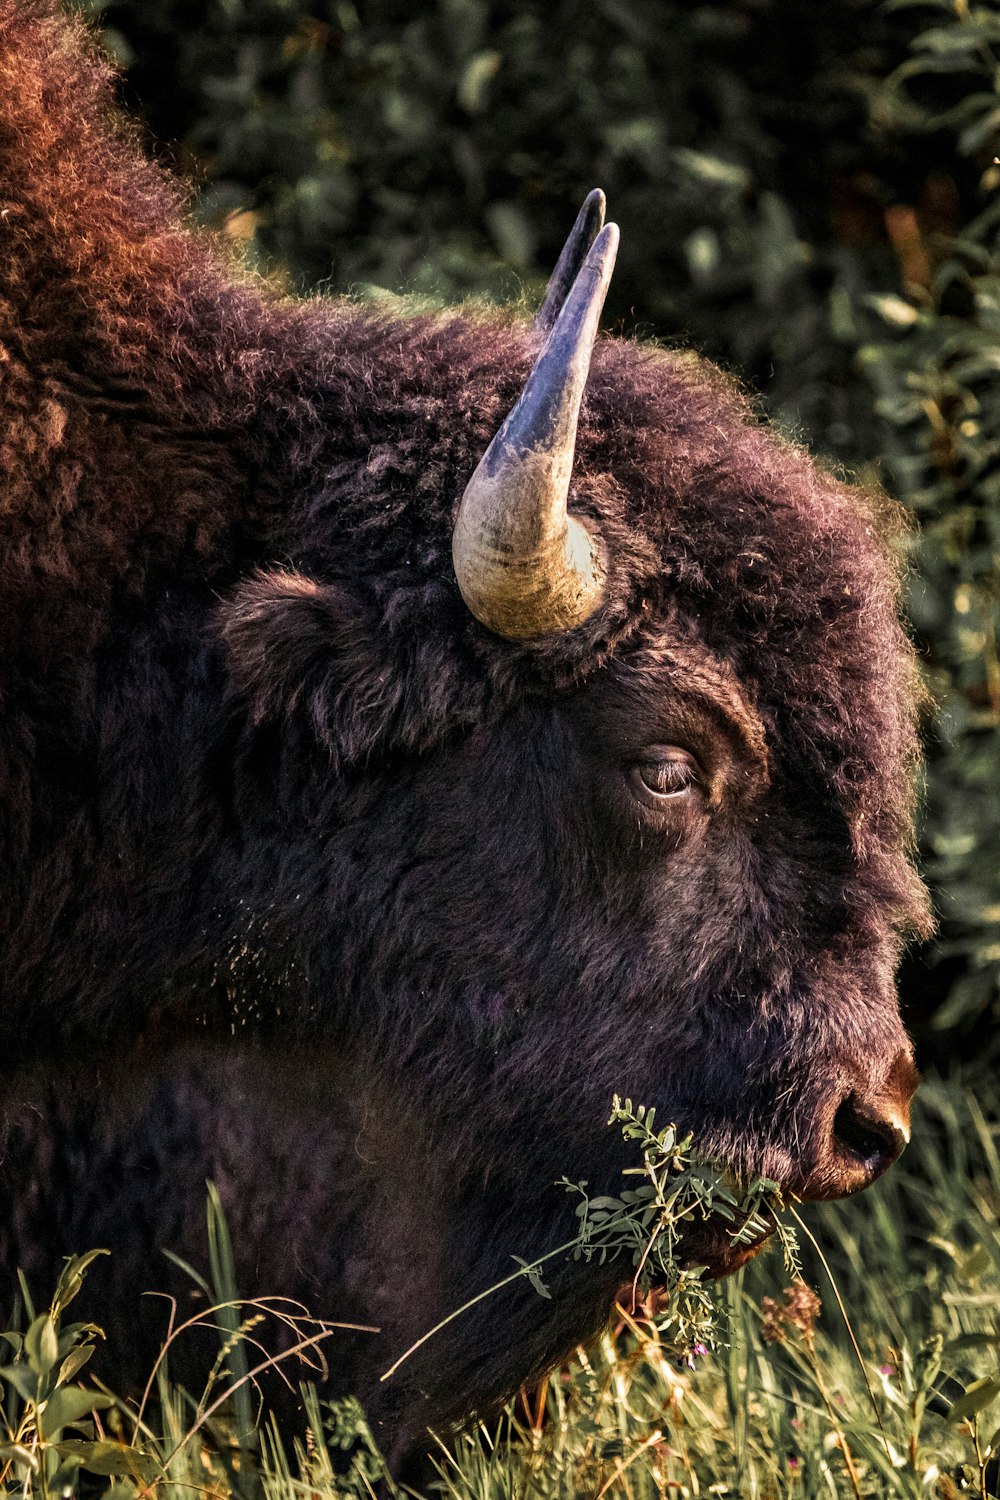 a bison with long horns standing in tall grass